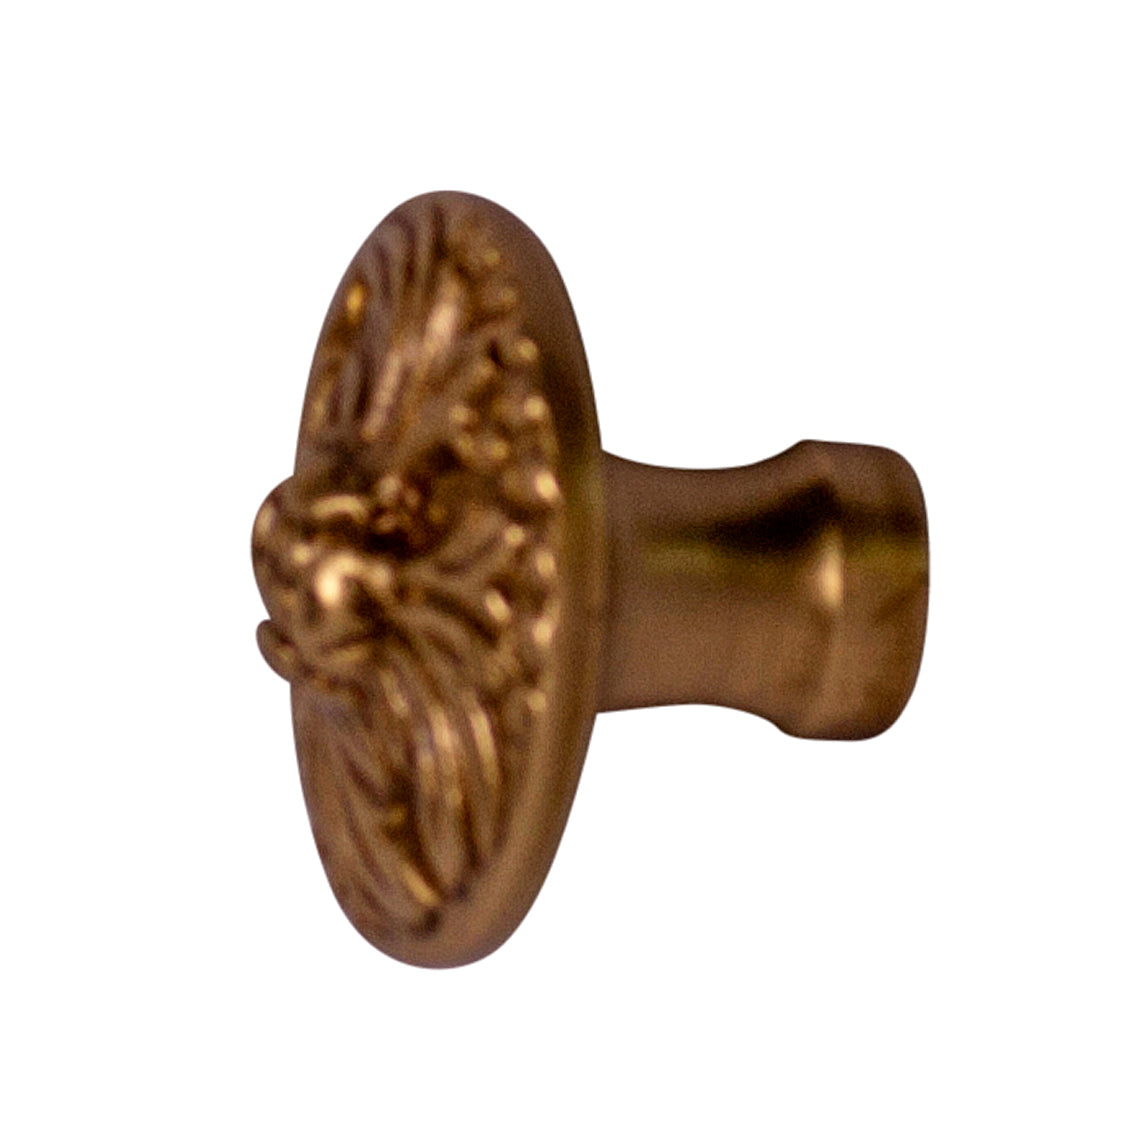 1 1/4 Inch Polished Brass Rococo Cabinet Knob (Several Finishes Available)